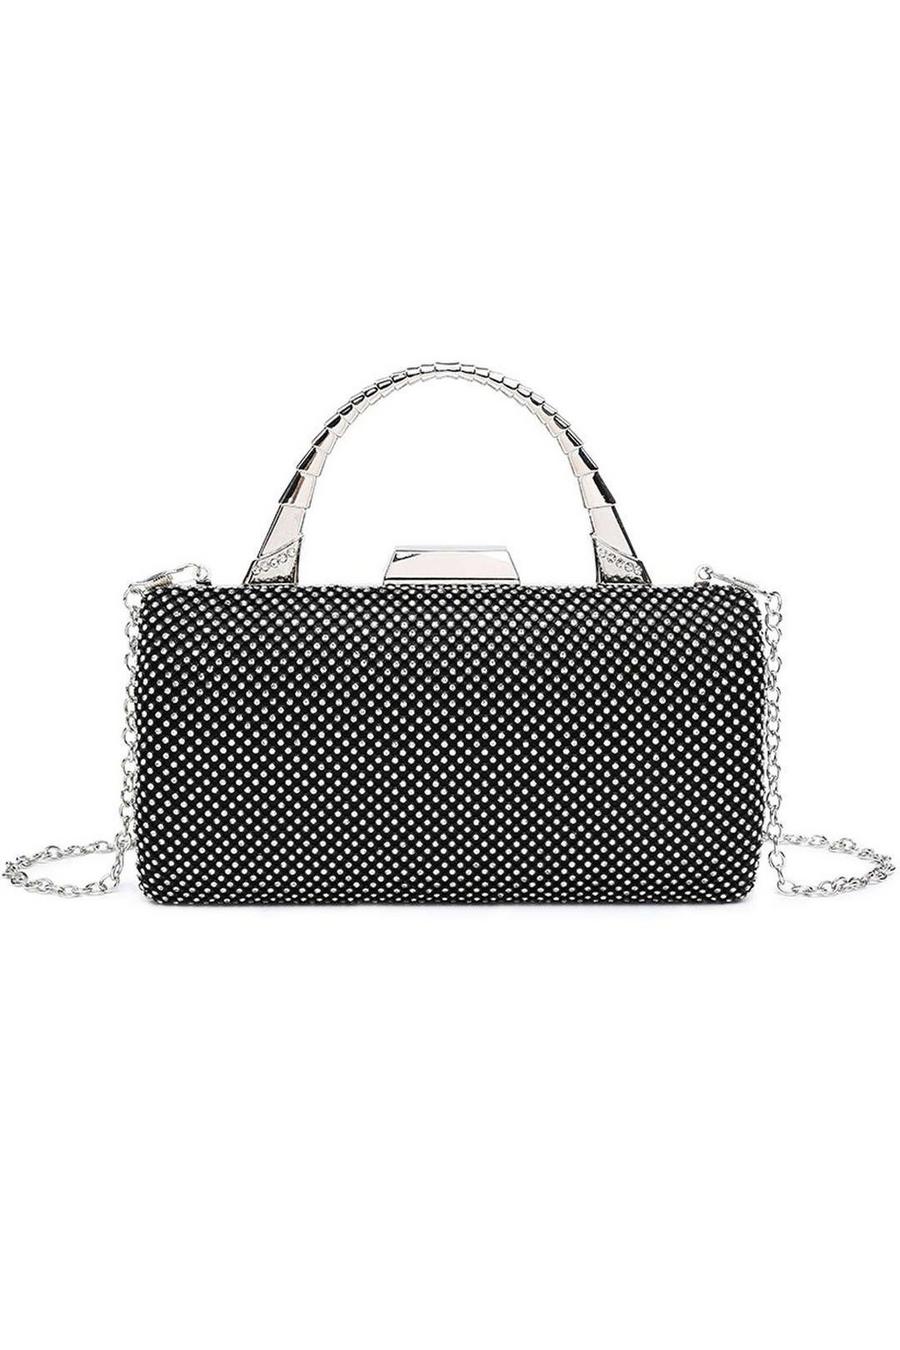 Black Small Top Handle Rhinestones Clutch Bag with Chain Strap